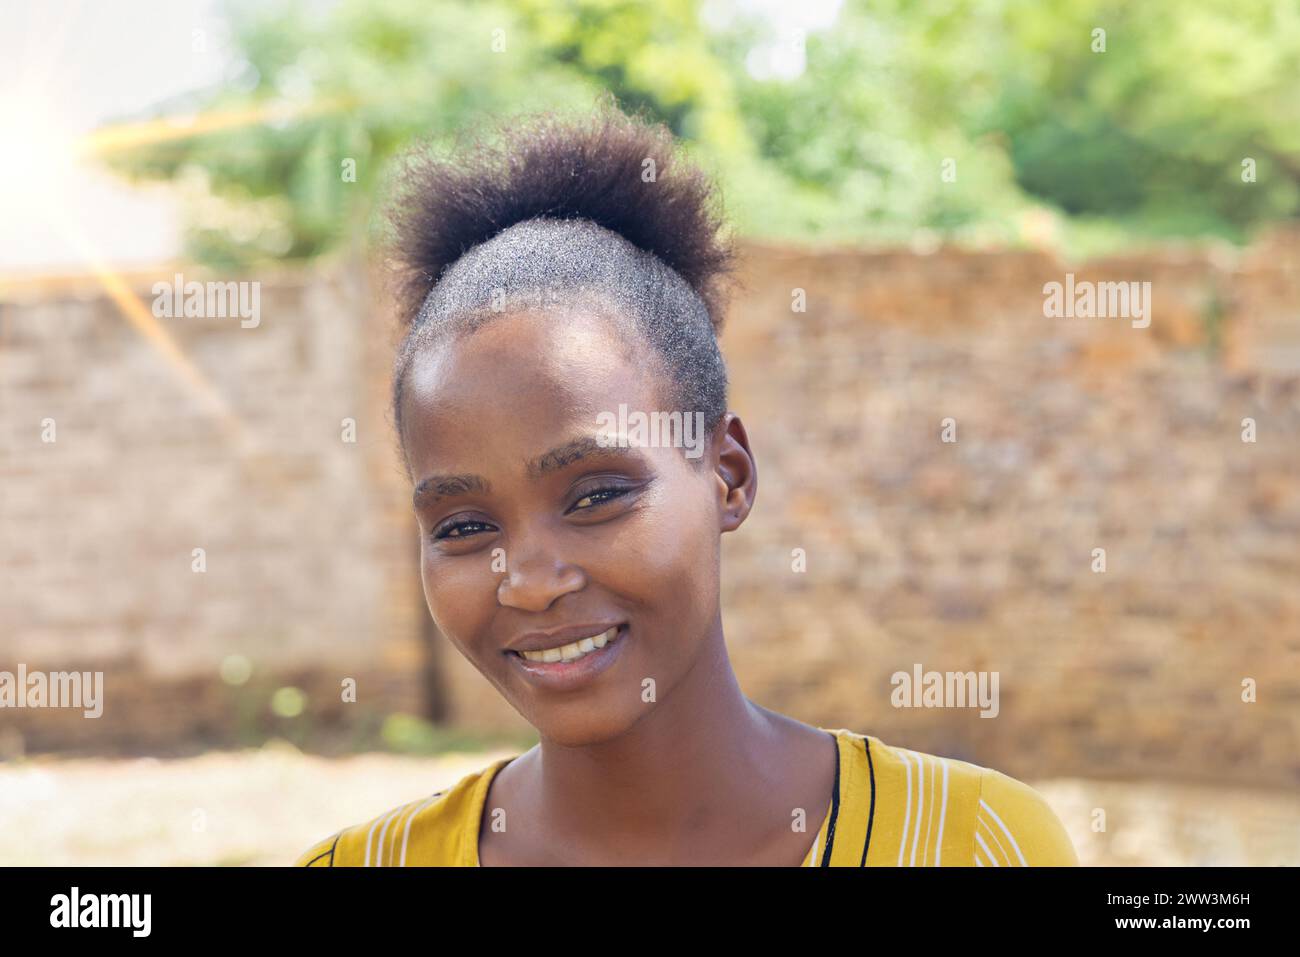 single young african woman with a big smile standing in the backyard Stock Photo